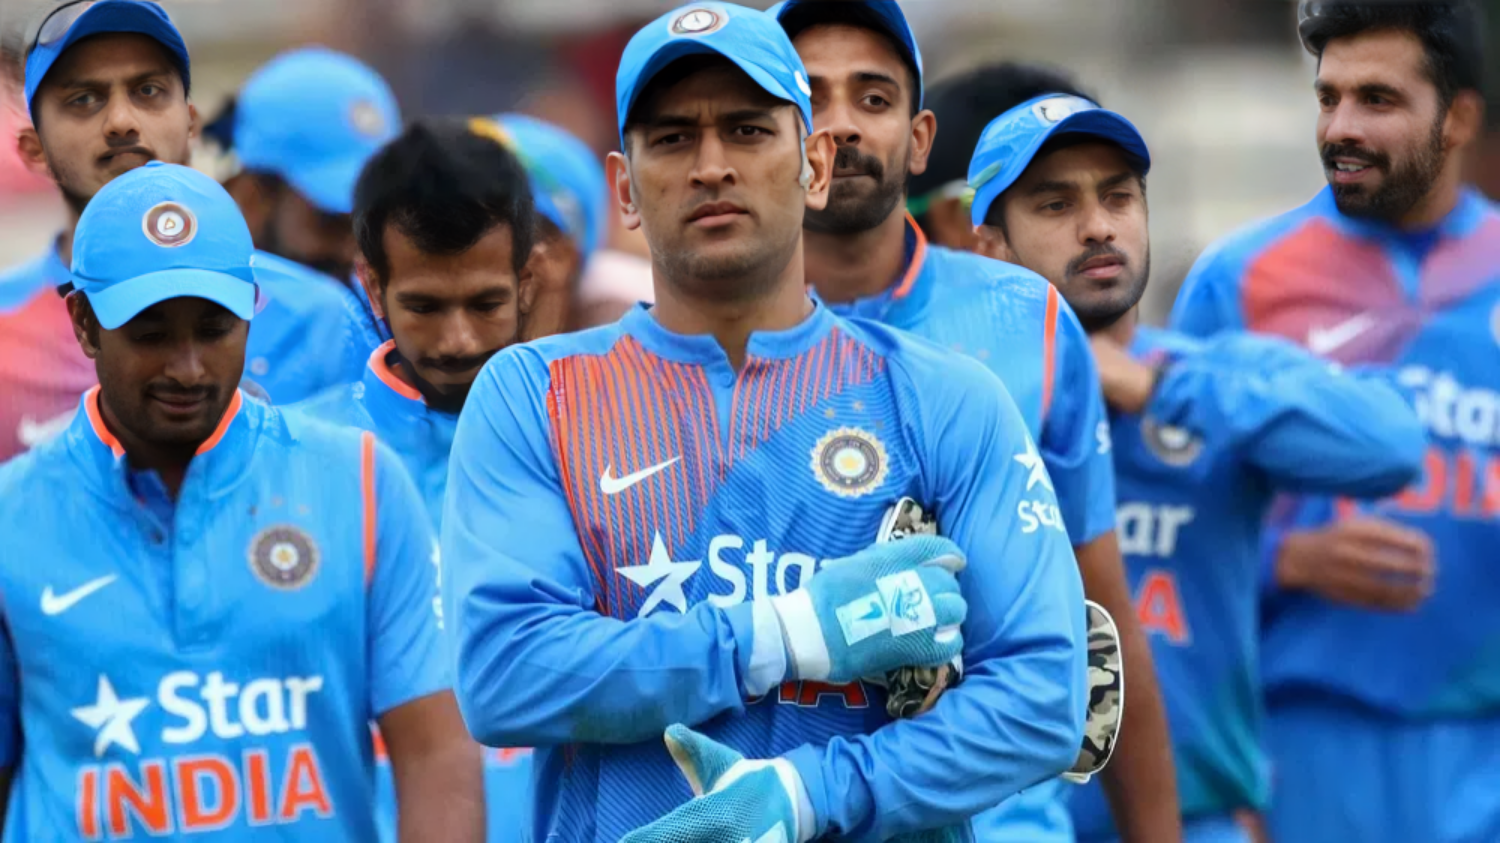 Fraud case registered against Mahendra Singh Dhoni, Rs 17 crore misappropriation case की तस्वीर